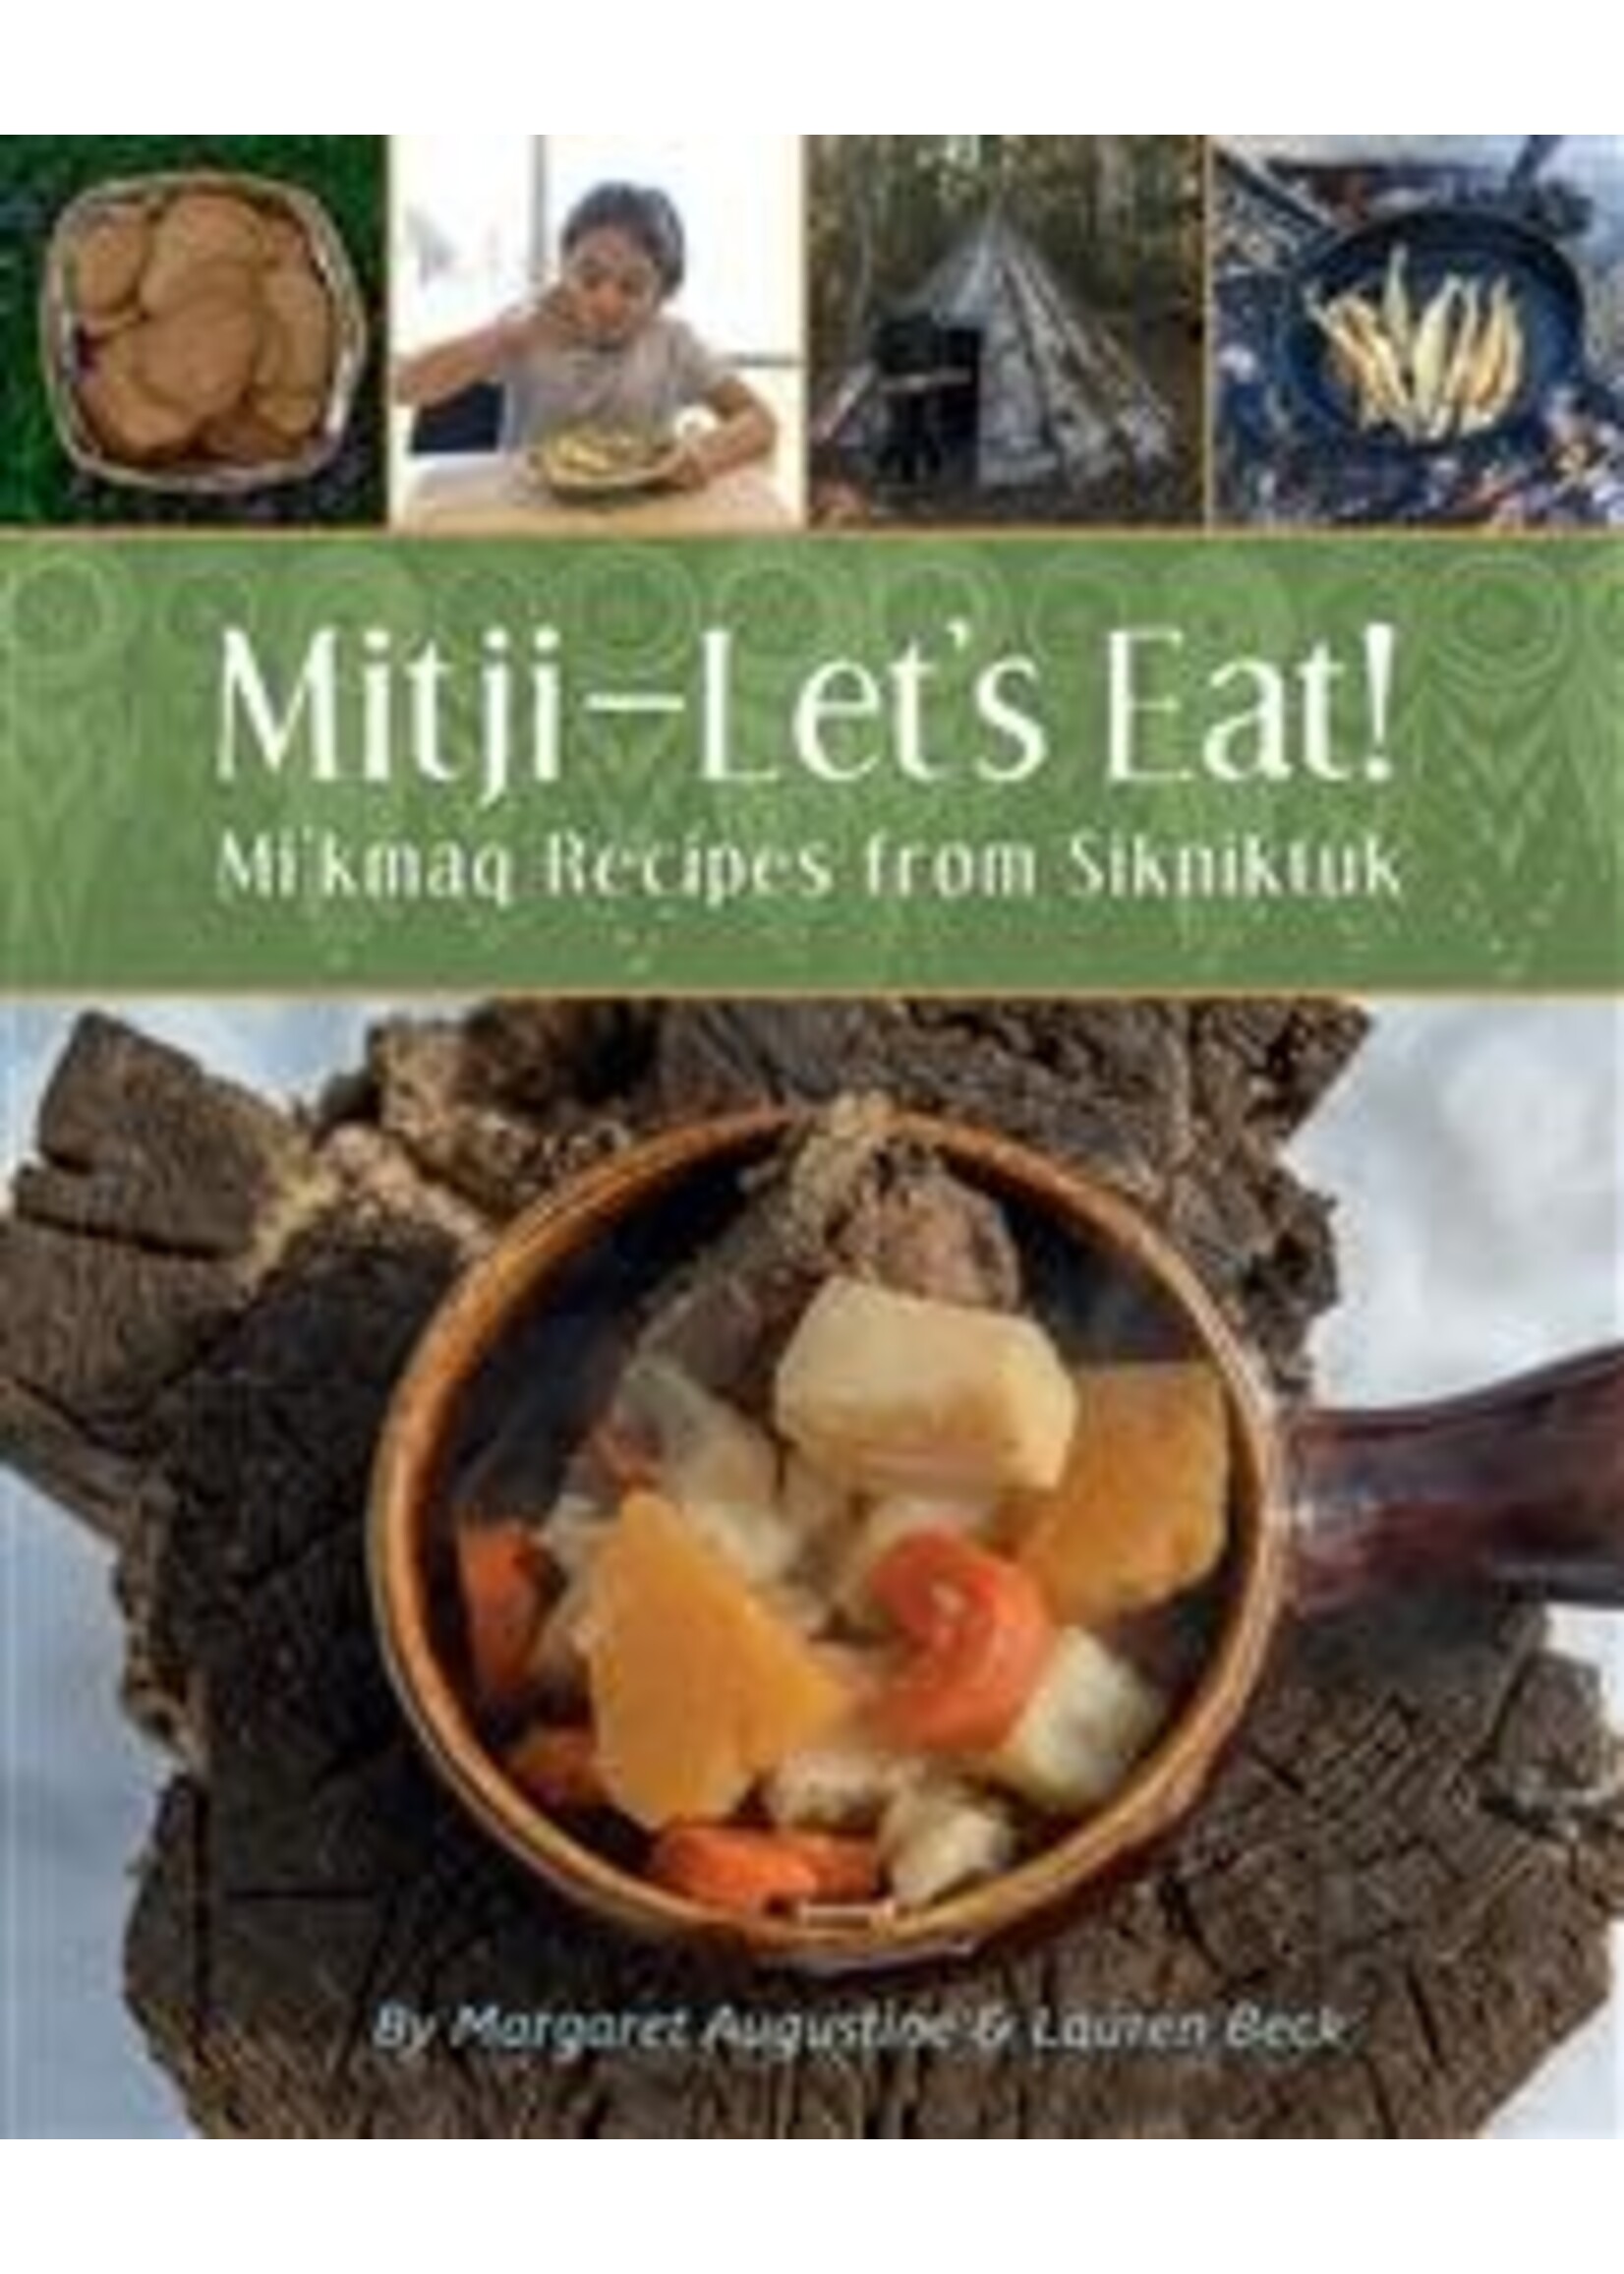 Mitji-Let's Eat! Mi'kmaq Recipes from Sikniktuk by Margaret Augustine, Dr. Lauren Beck, Patricia Bourque